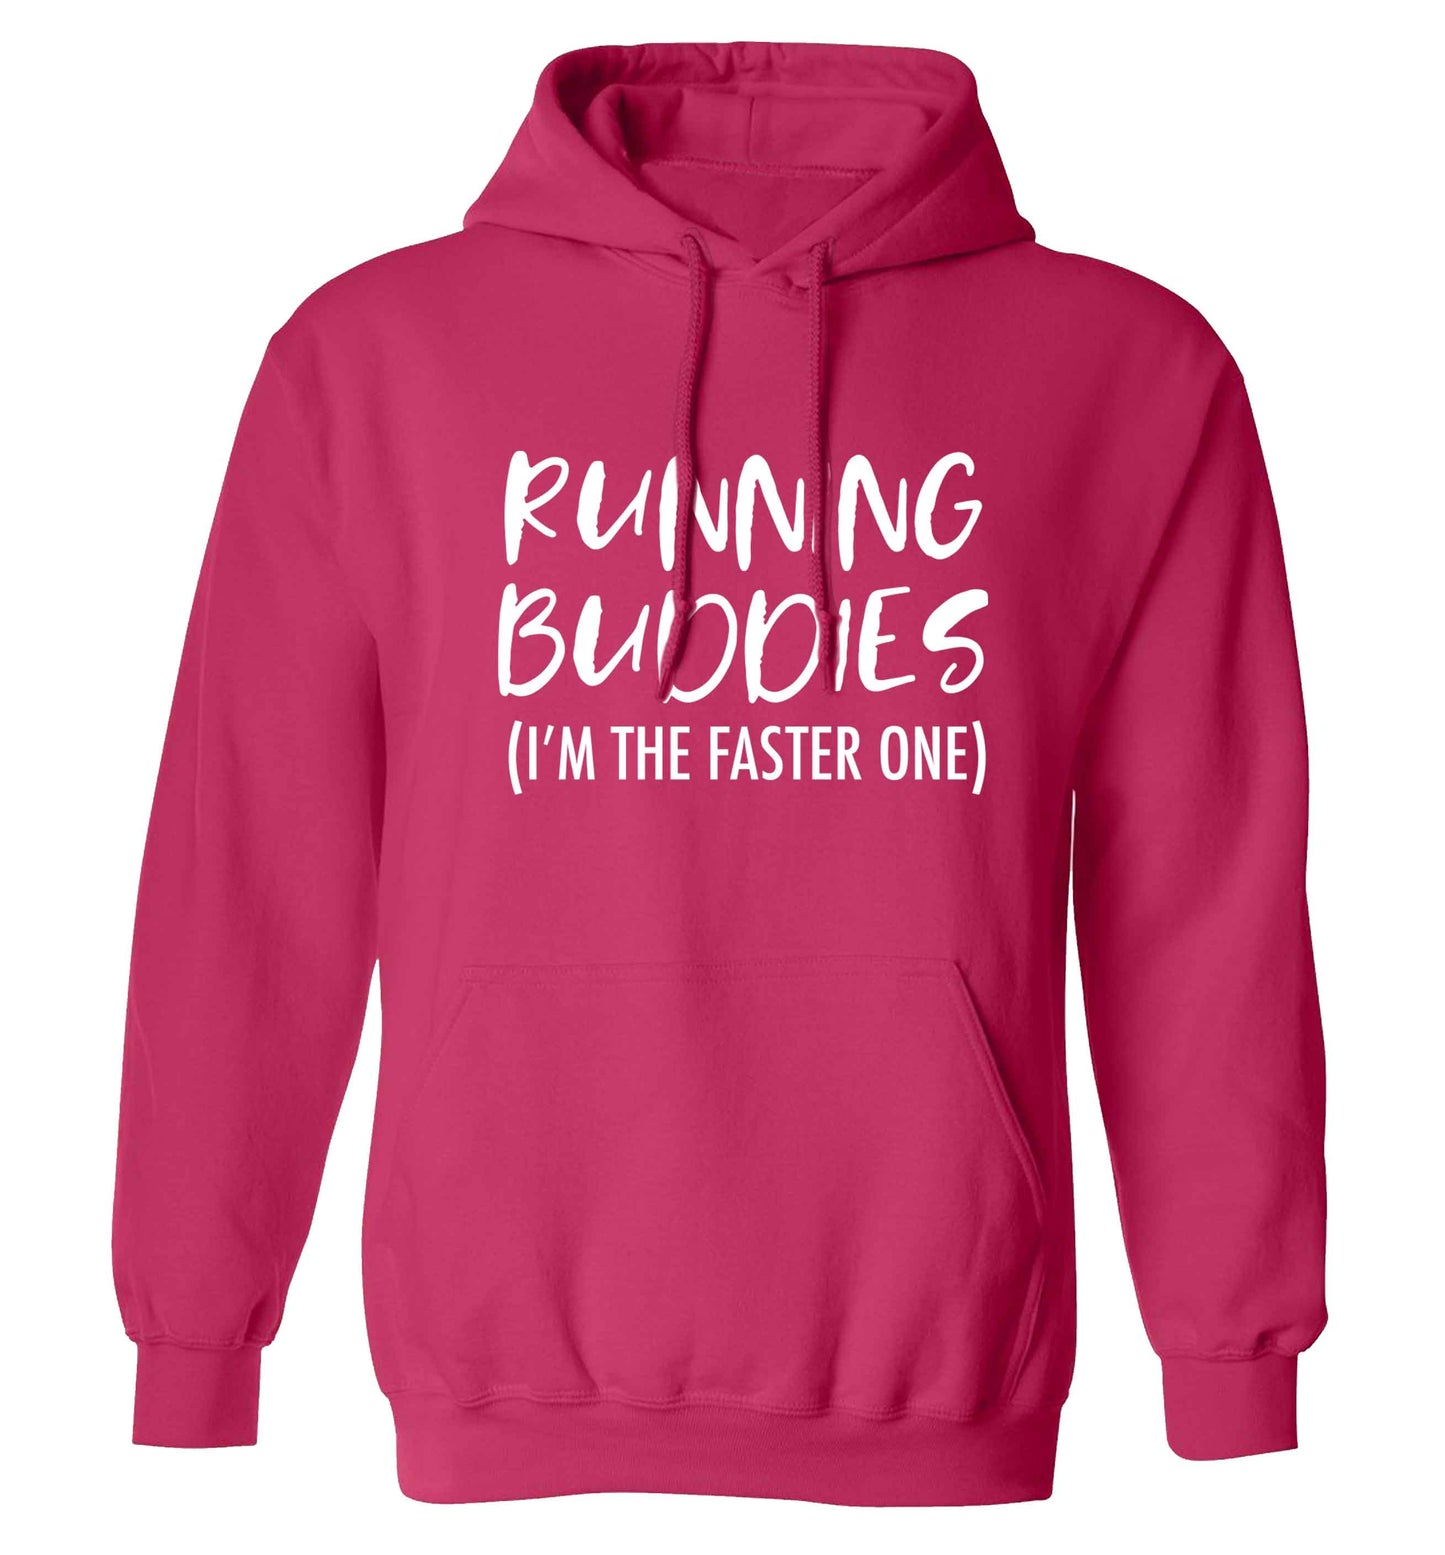 Running buddies (I'm the faster one) adults unisex pink hoodie 2XL